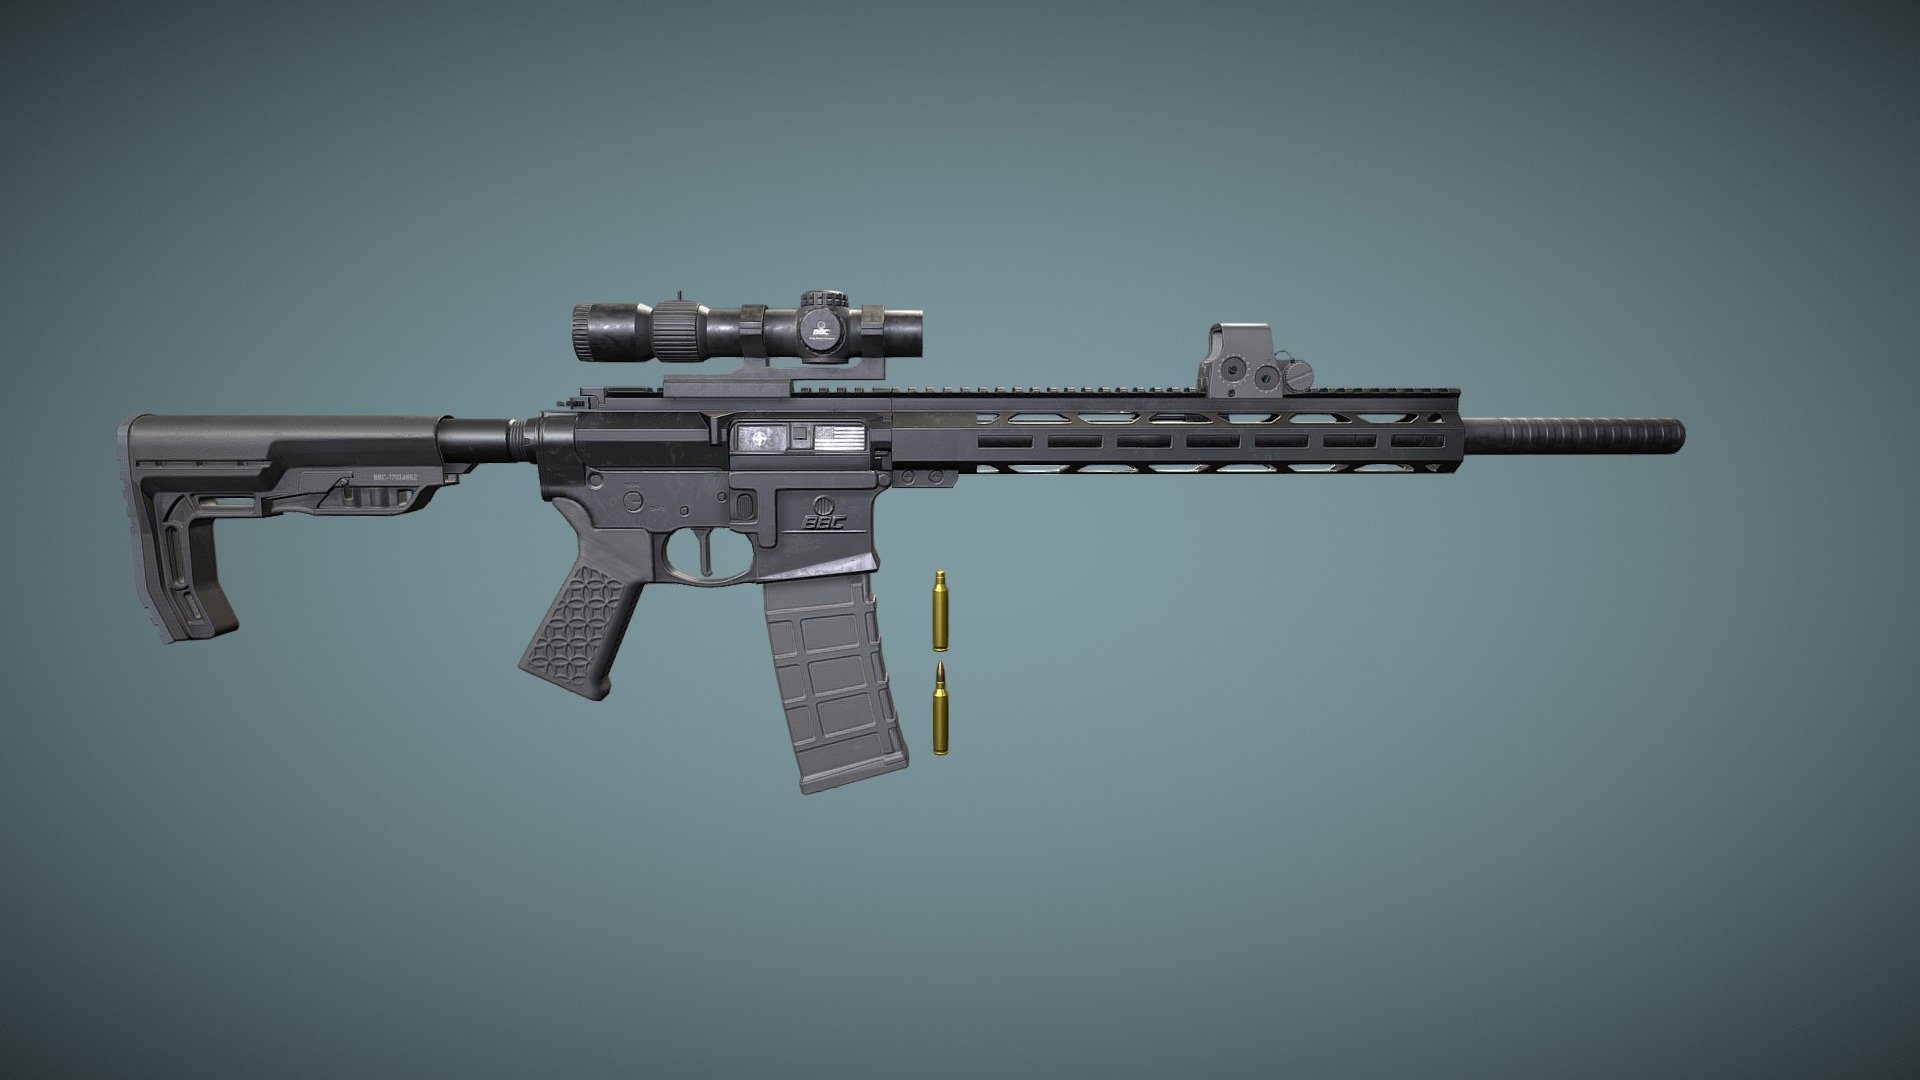 Ar15
Made in Blender and Zbrush. Baked in Marmoset Toobag 4 and textured in Adobe Substance Painter.

It's fully modular system. I was trying to make separate textures for all additional things
ArBody: 15k triangles and 4k texture

Bullet_low 1308 triangles for both and 512X512 texture
Suppressor 236 triangles and 2k texture 
Magazine 2184 triangles and  2k texture 
Holosight 6k triangles and 4k texture 
7k triangles for Scope and Rail. 4k texture for Scope 1k for Rail.

Free to use!
Also check this  link tree for more stuff 3d model